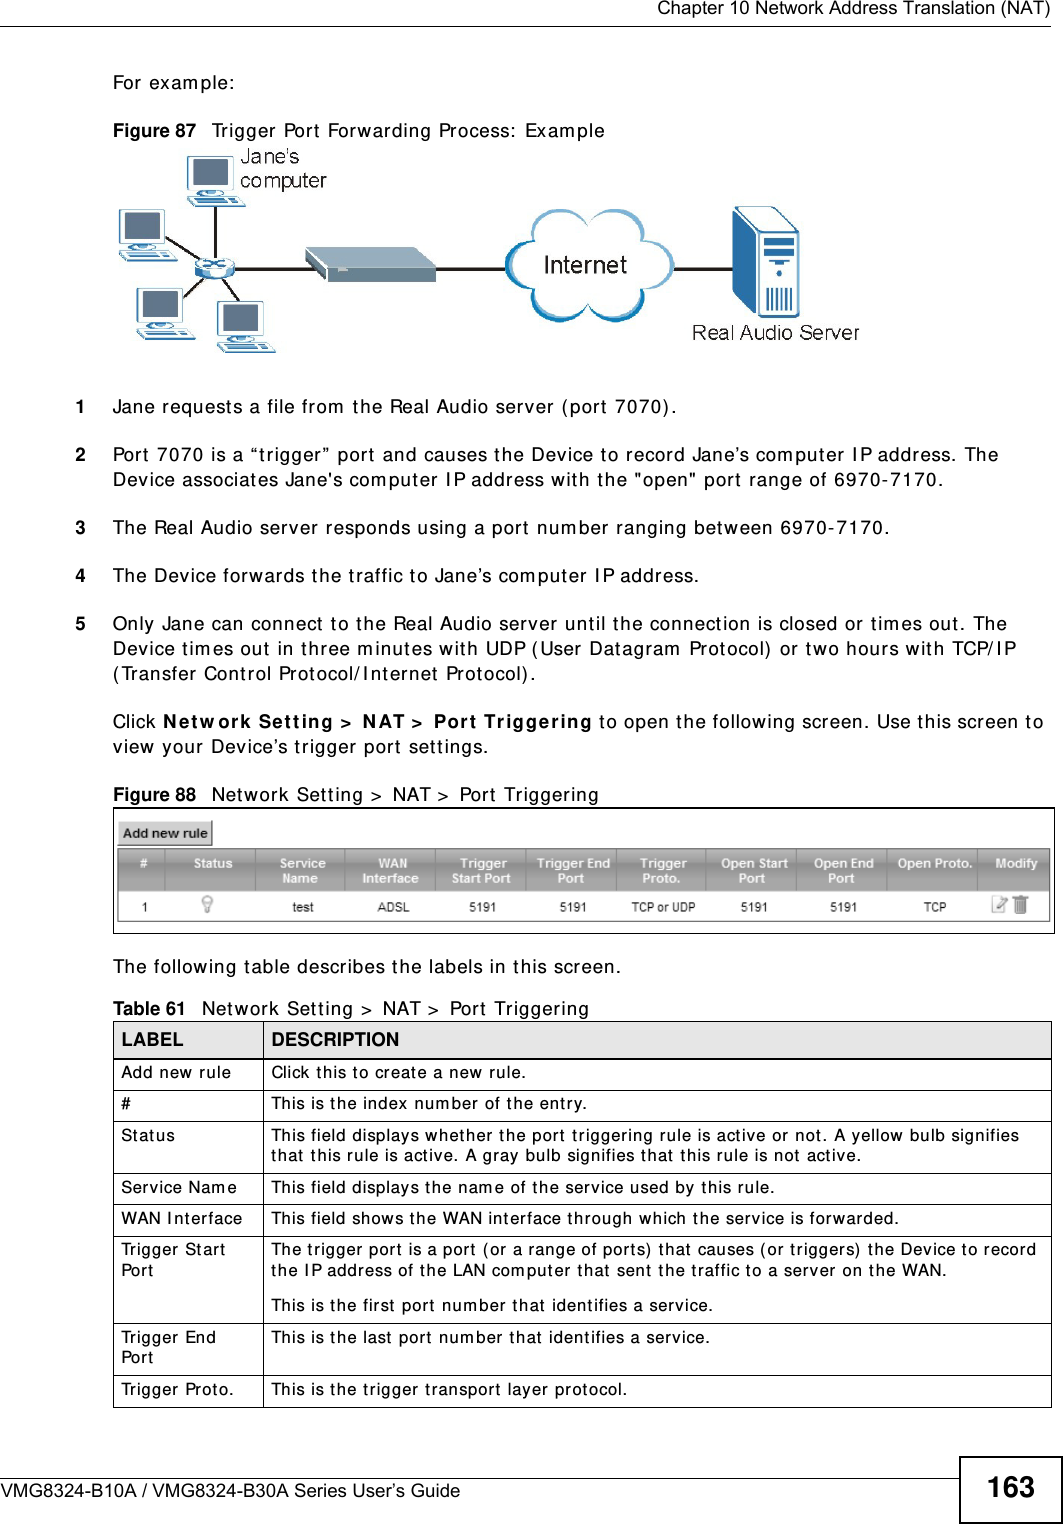  Chapter 10 Network Address Translation (NAT)VMG8324-B10A / VMG8324-B30A Series User’s Guide 163For exam ple:Figure 87   Trigger Port Forwarding Process:  Exam ple1Jane request s a file from  t he Real Audio server ( port  7070) .2Port 7070 is a “ t rigger ”  port and causes the Device t o record Jane’s com puter I P address. The Device associat es Jane&apos;s com put er I P address wit h t he &quot; open&quot;  port  range of 6970- 7170.3The Real Audio server responds using a port  num ber ranging between 6970- 7170.4The Device forwards t he traffic t o Jane’s com puter I P address. 5Only Jane can connect  t o t he Real Audio server until t he connect ion is closed or tim es out. The Device tim es out in t hree m inutes with UDP (User Datagram  Prot ocol)  or t wo hours wit h TCP/ I P ( Transfer Cont rol Prot ocol/ I nternet  Protocol) . Click N e t w or k Se t t ing &gt;  N AT &gt;  Por t  Trigge r ing to open the following screen. Use t his screen t o view your Device’s t rigger port set t ings.Figure 88   Net work Set t ing &gt;  NAT &gt;  Port Triggering The following t able describes t he labels in this screen. Table 61   Net work Sett ing &gt;  NAT &gt;  Port  TriggeringLABEL DESCRIPTIONAdd new rule Click t his t o creat e a new rule.#This is t he index num ber of t he entry.St atus This field display s whet her t he port  t rigger ing rule is act ive or not .  A yellow bulb signifies that  this rule is active. A gray  bulb signifies t hat  t his r ule is not active.Service Nam e This field displays the nam e of t he ser vice used by t his rule.WAN I nt erface This field shows the WAN interface through which the service is forwarded.Trigger St art  PortThe t rigger port  is a port  ( or a range of port s)  that  causes ( or triggers)  t he Device to record t he I P address of the LAN com put er that  sent the traffic t o a server  on t he WAN.This is t he first  port num ber t hat  ident ifies a serv ice.Trigger End PortThis is t he last  por t  num ber t hat  ident ifies a service.Trigger Prot o. This is t he t r igger t ransport  layer prot ocol. 